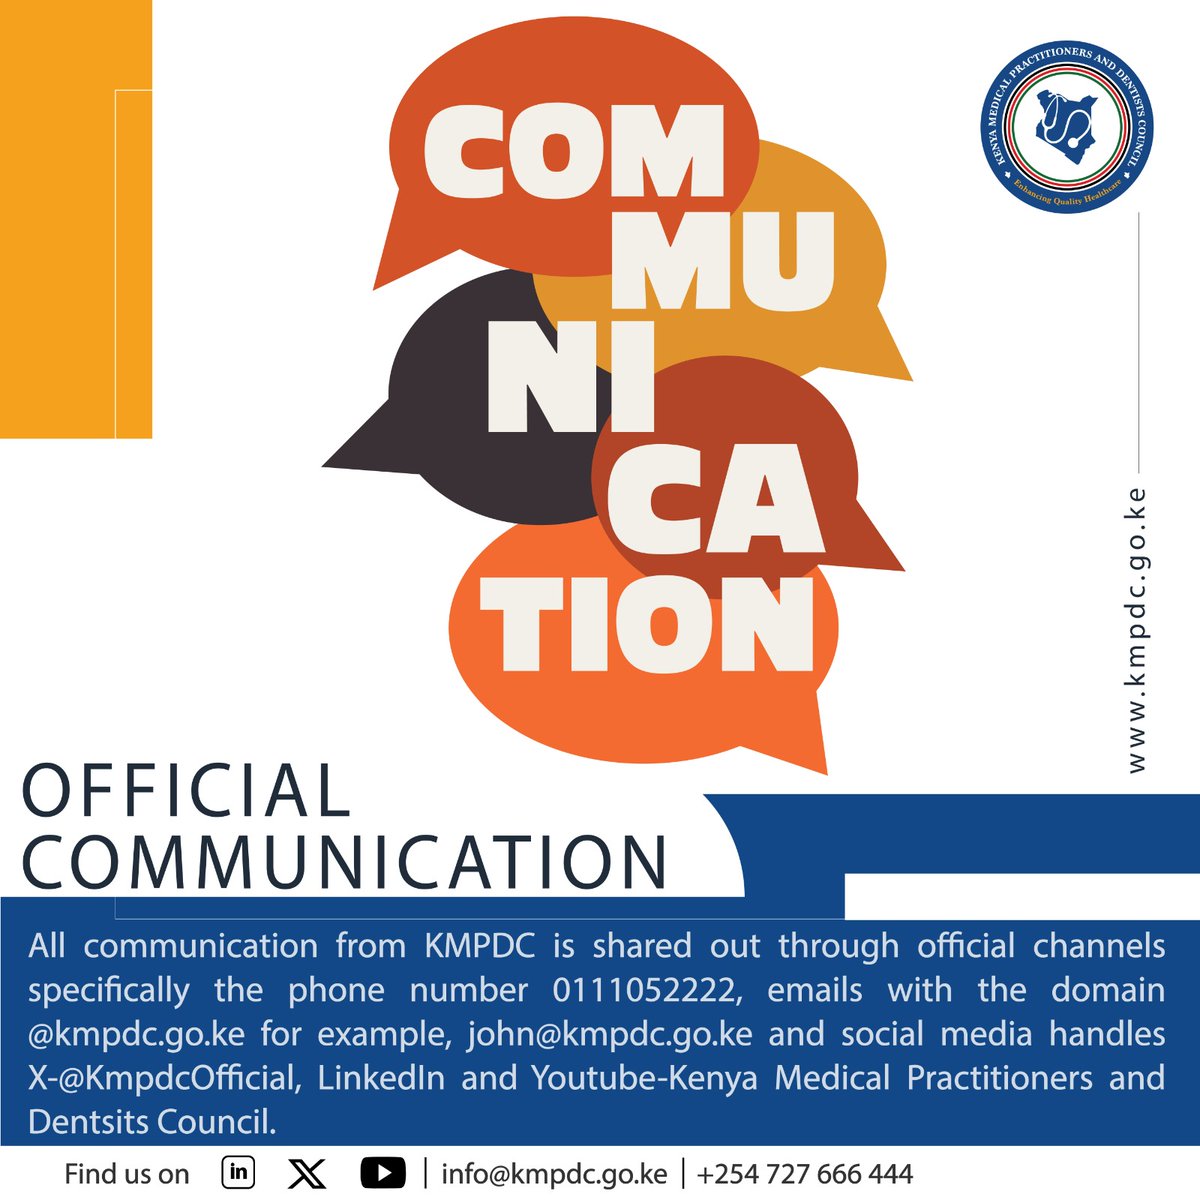 All communication from KMPDC is shared out through official channels specifically the phone number 0111052222, emails with the domain @kmpdc.go.ke for example, john@kmpdc.go.ke and social media handles X-@KmpdcOfficial, LinkedIn and Youtube-Kenya Medical Practitioners and…